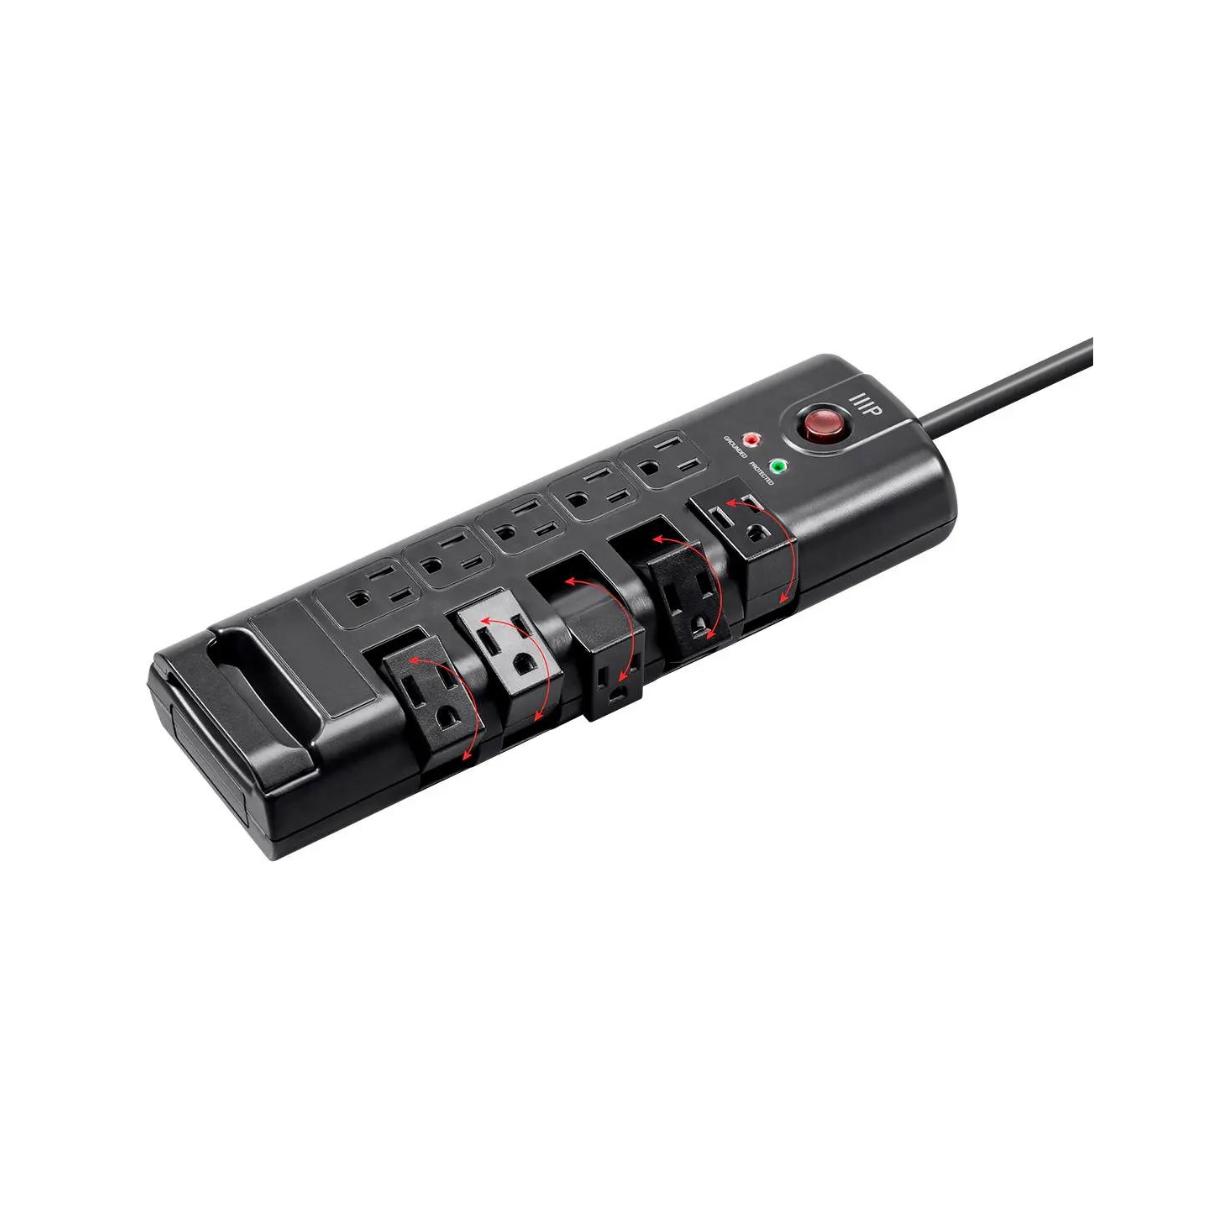 8 Best Rotating Plug Surge Protector for 2023